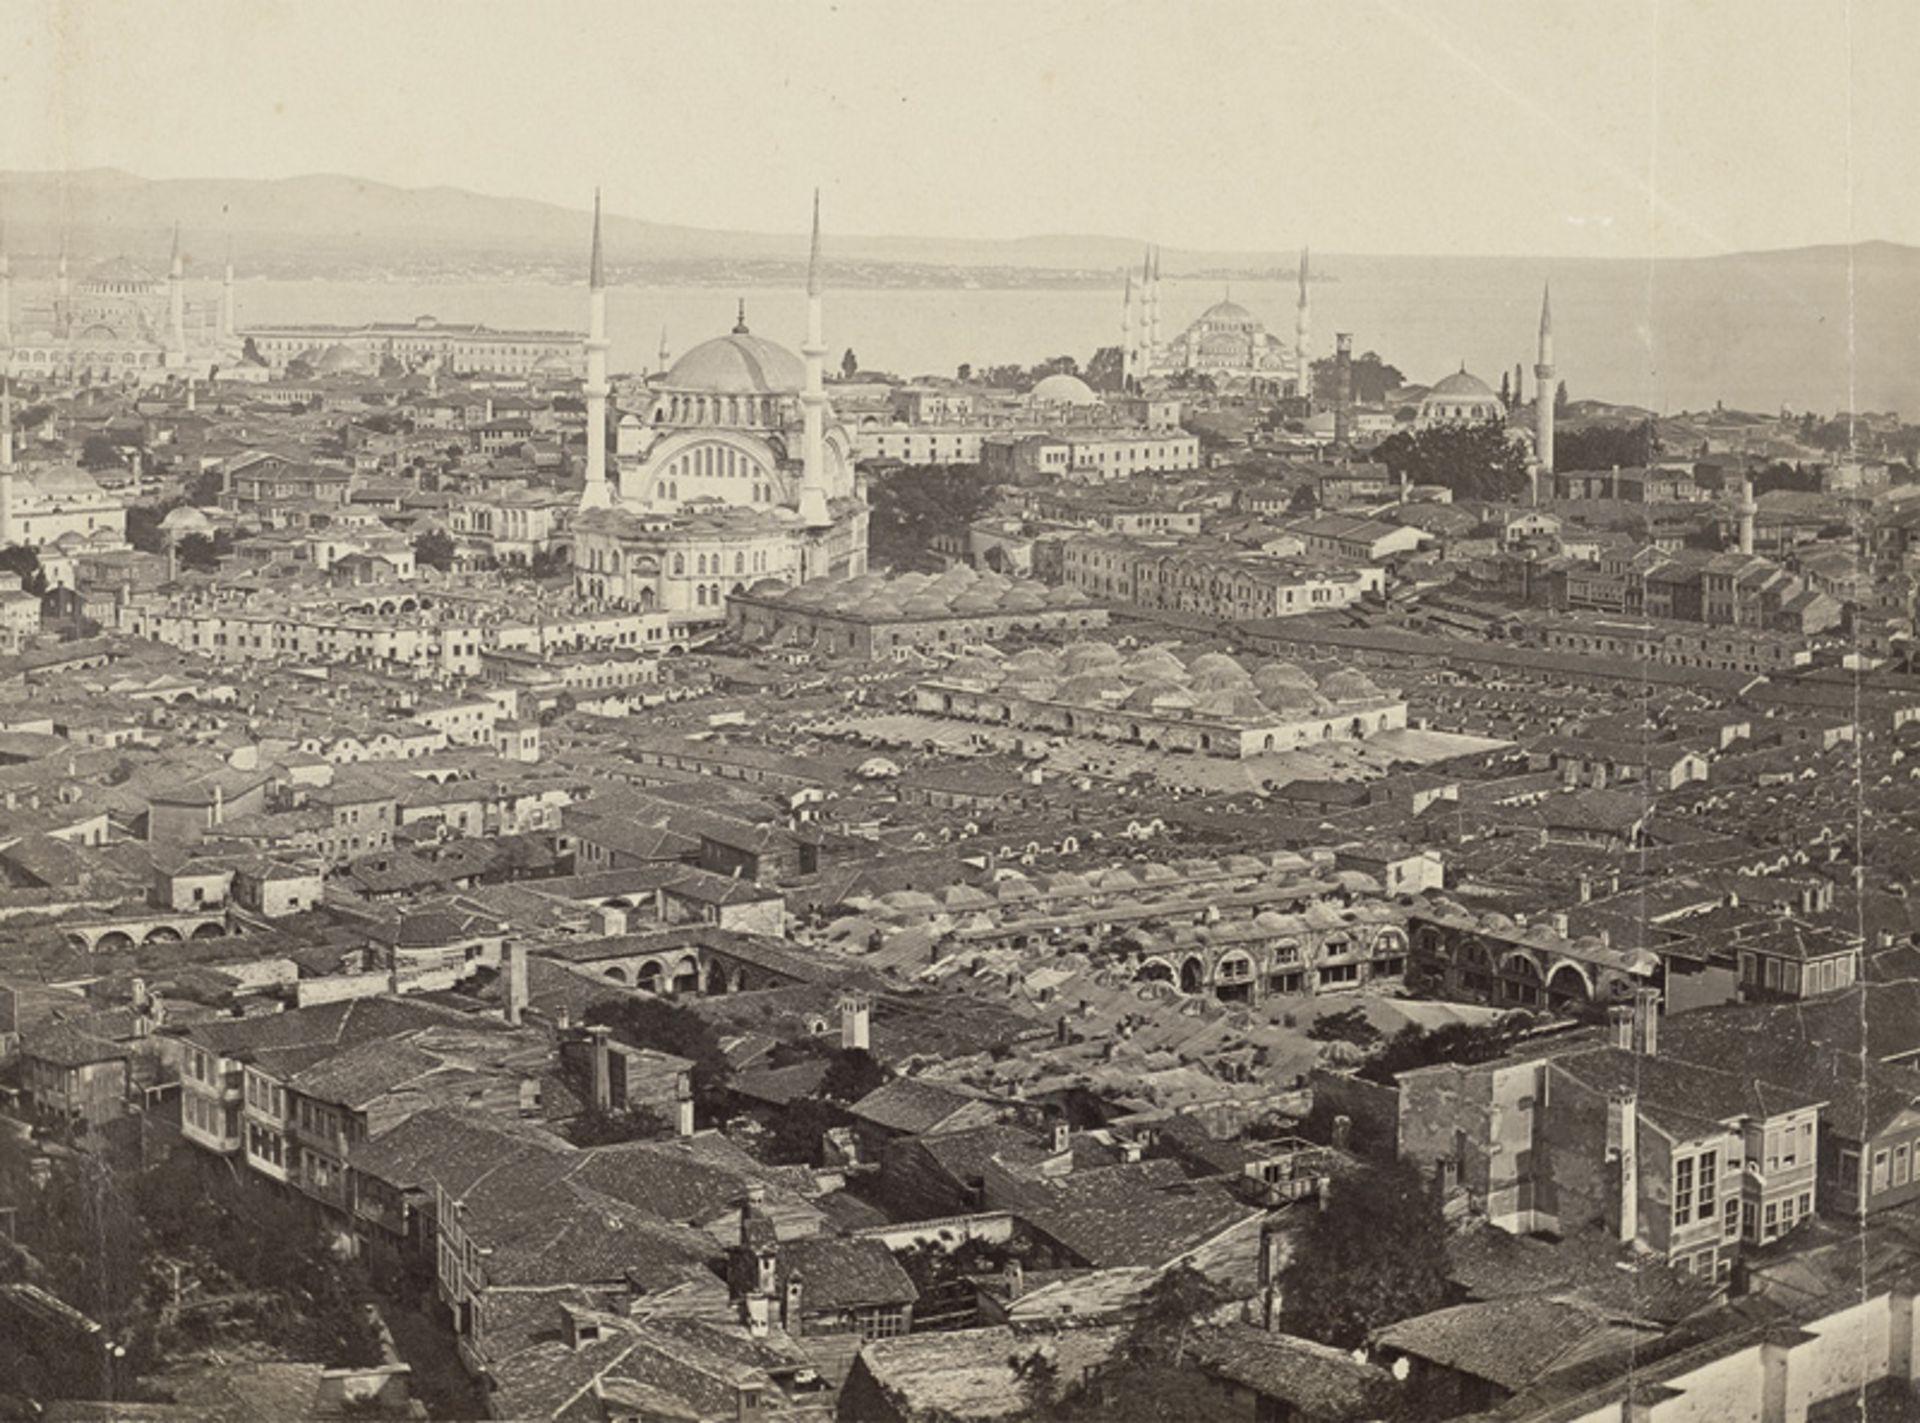 Robertson, James and Felice Beato: Panorama of Constantinople - Image 6 of 6